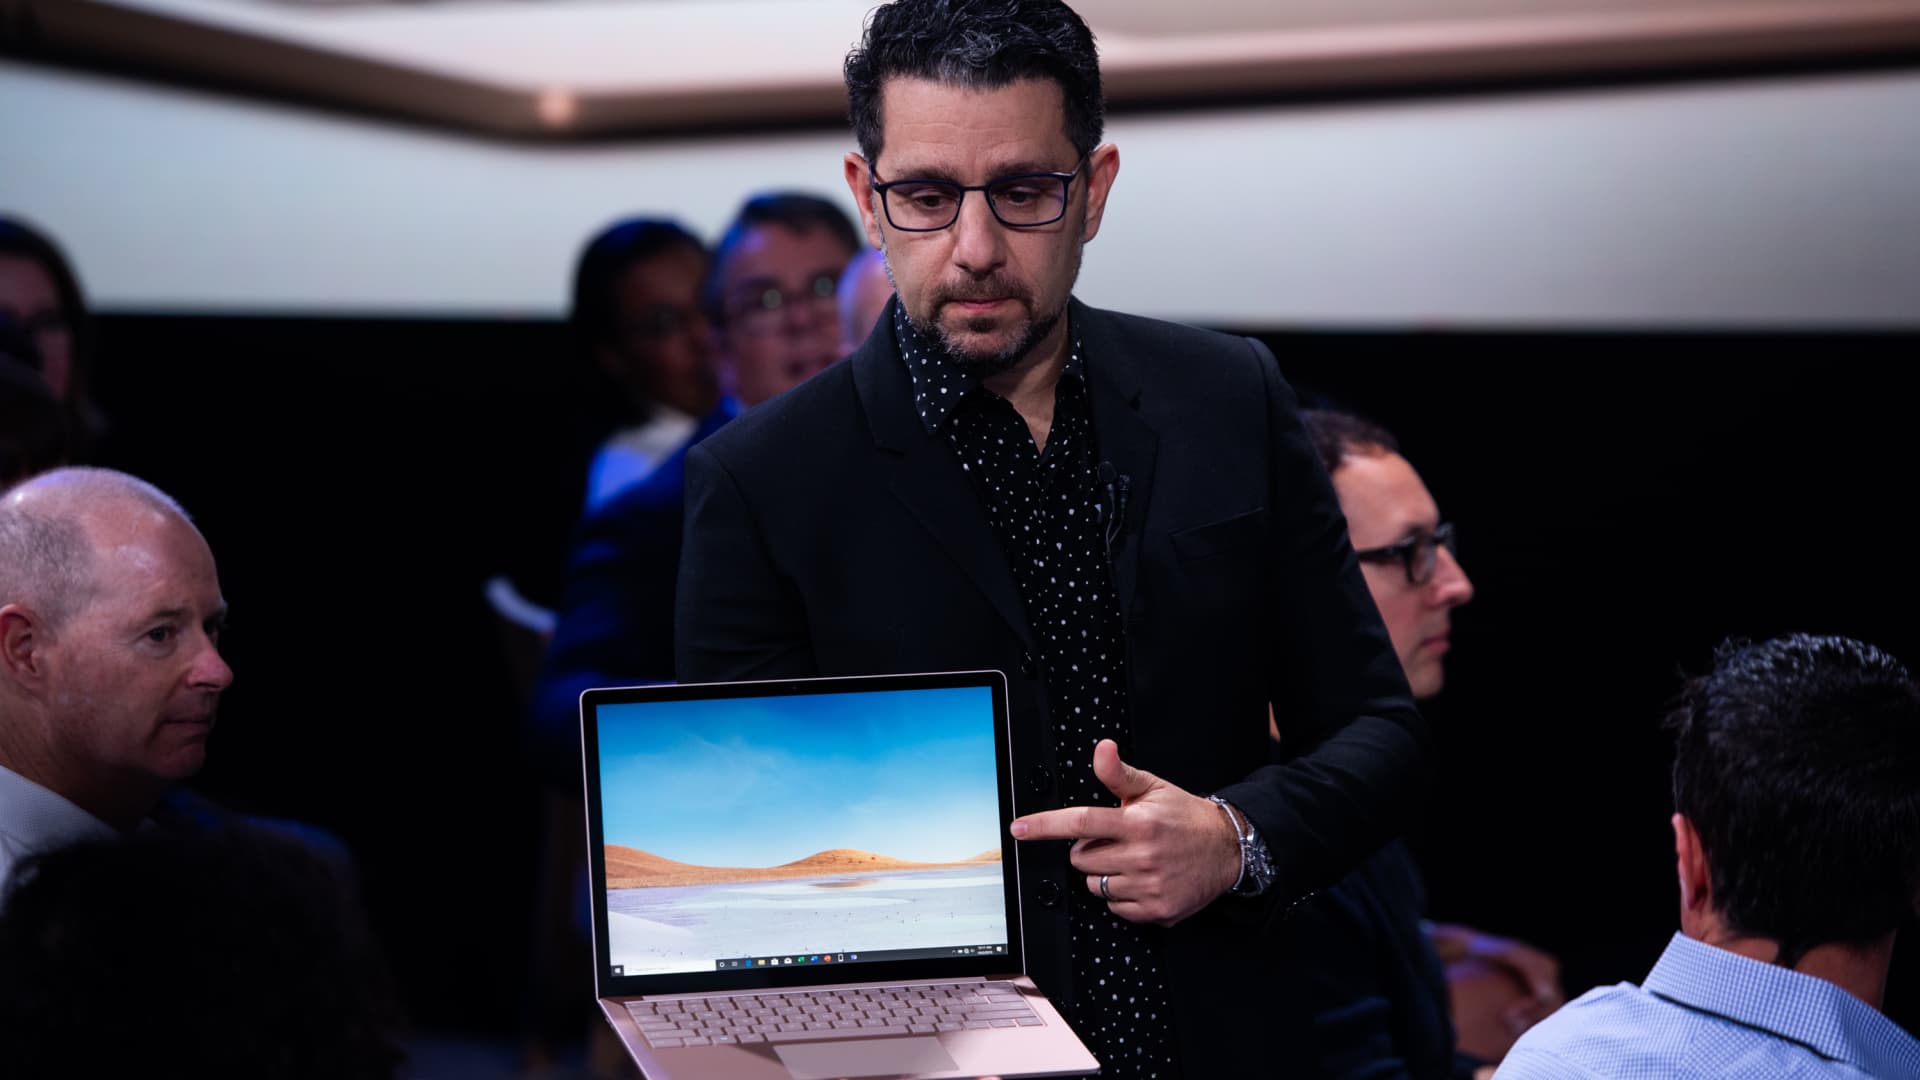 Microsoft Surface is nearly a $7 billion business after a decade